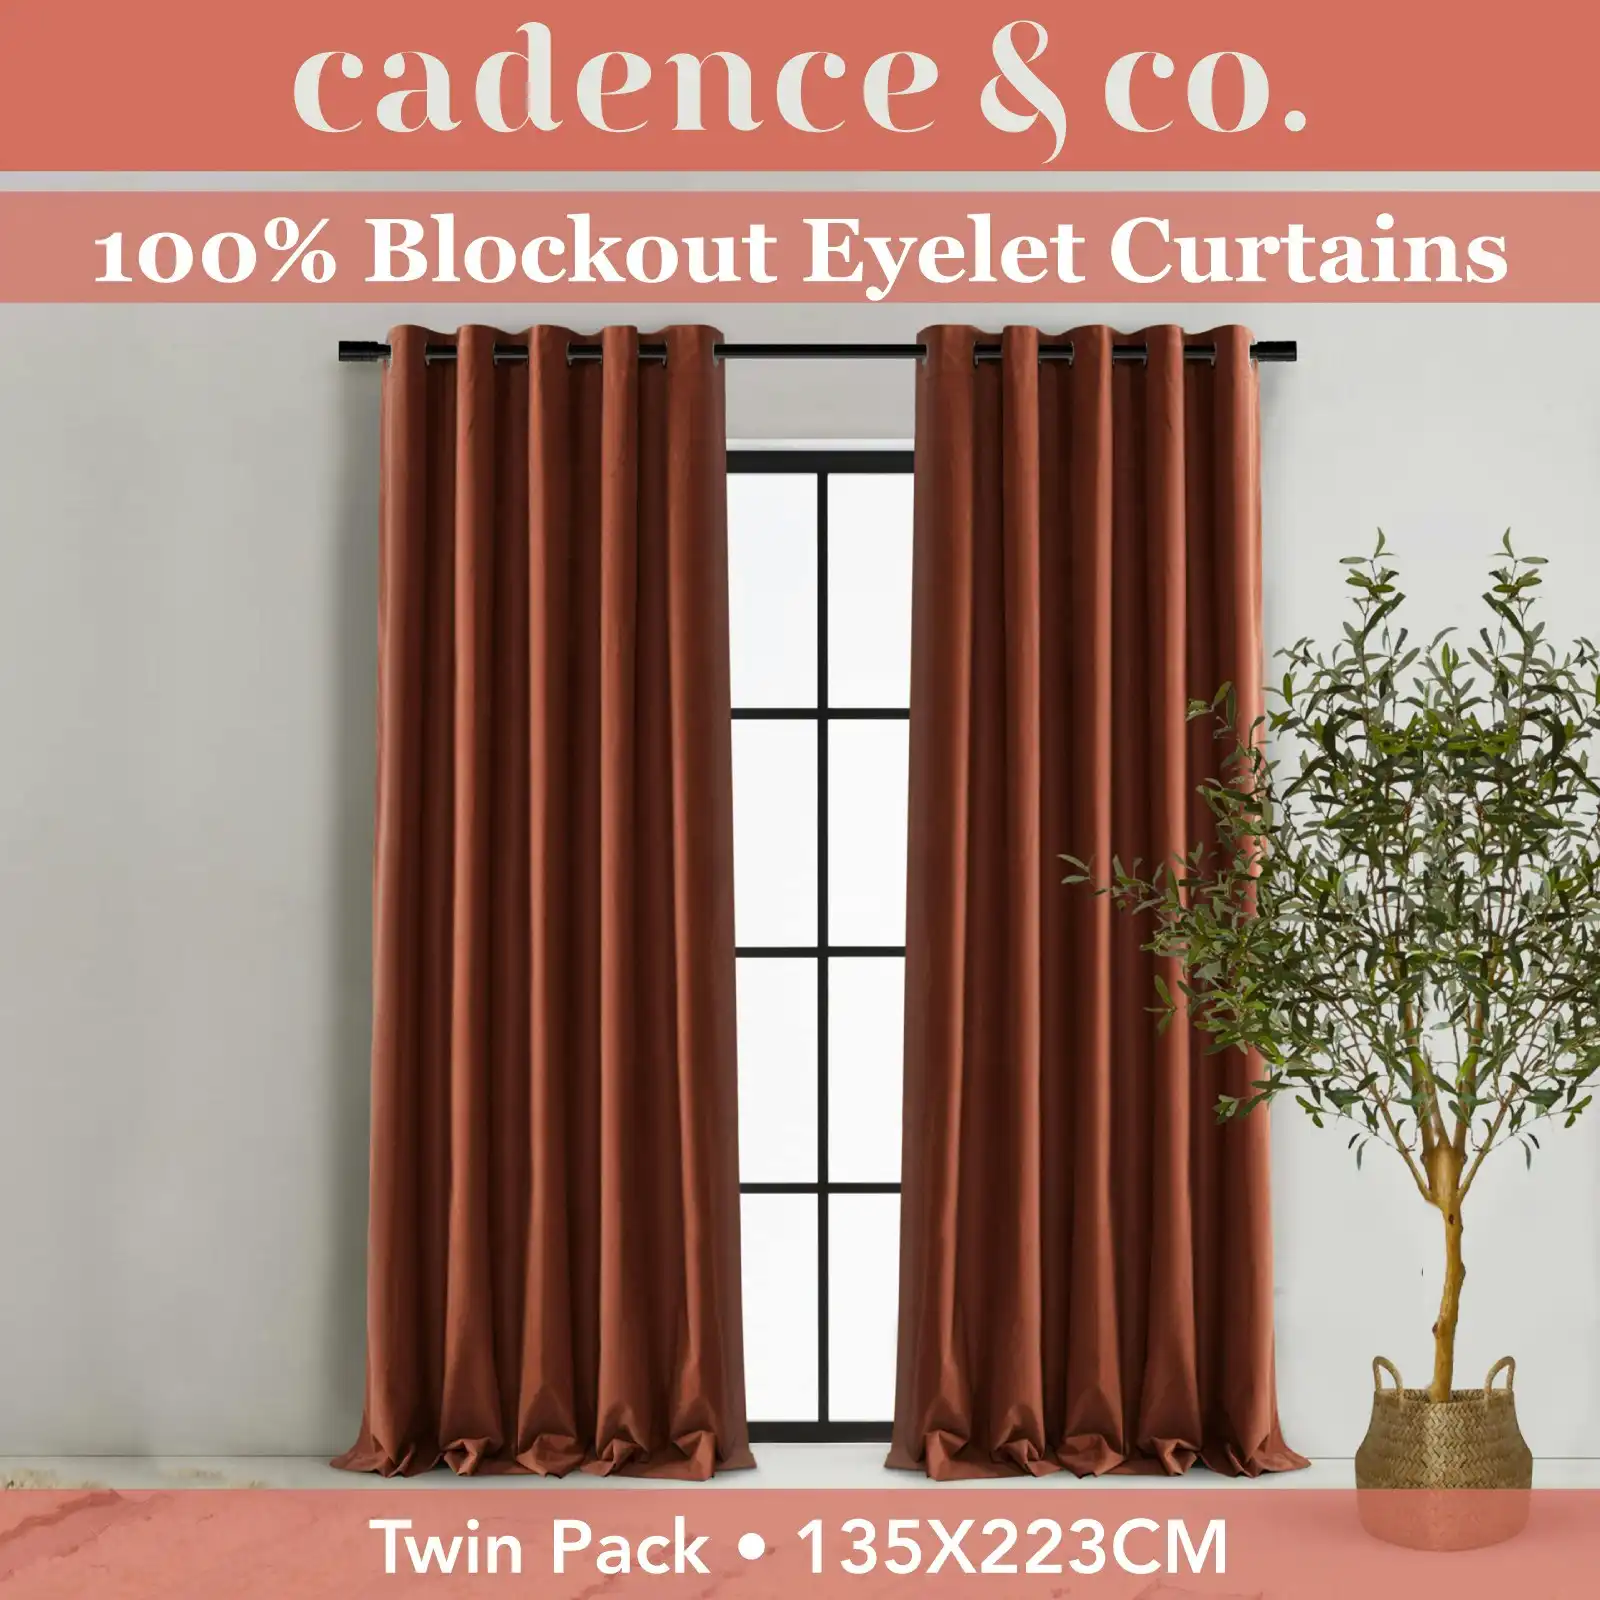 Cadence & Co Byron Matte Velvet 100% Blockout Eyelet Curtains Twin Pack Rust 135x223cm